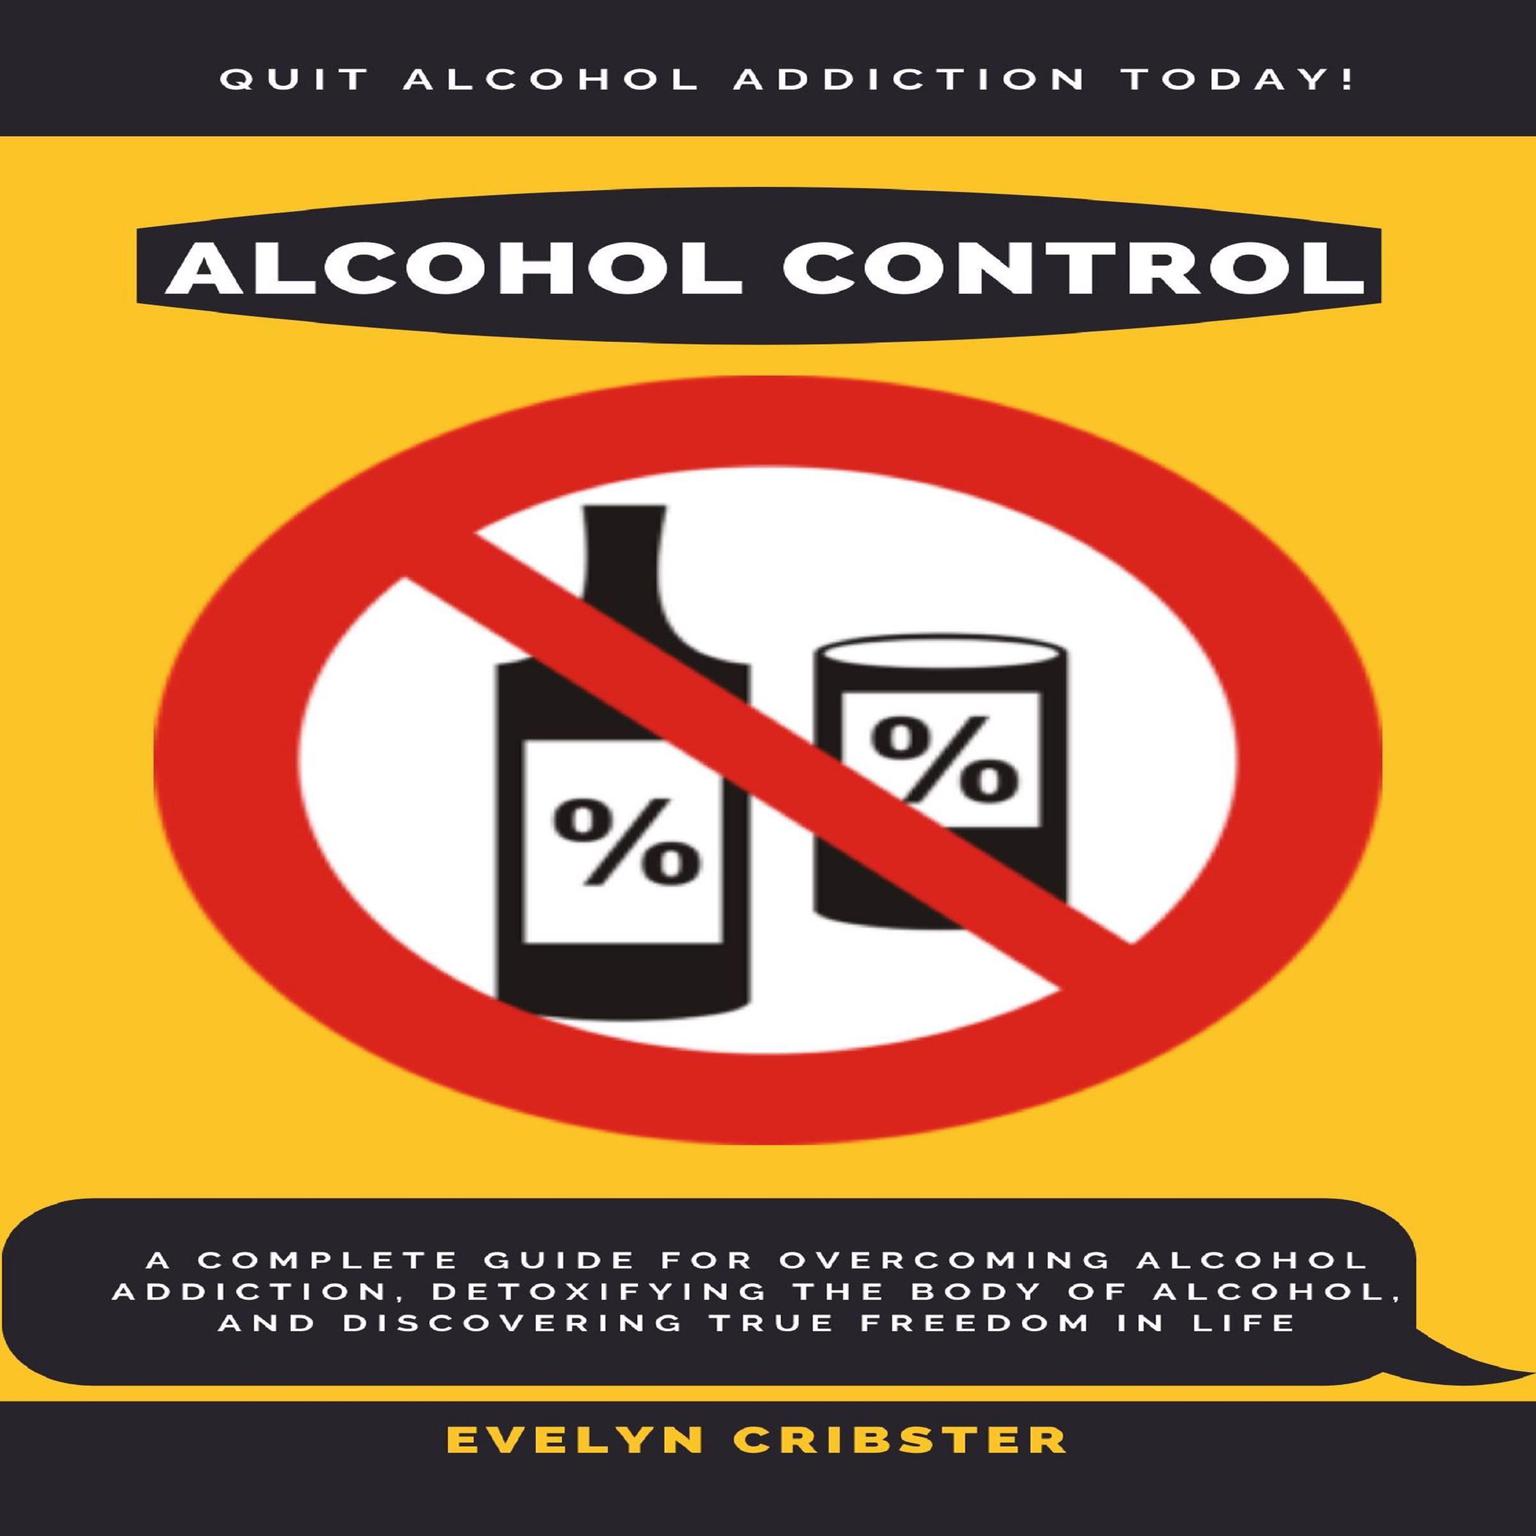 Alcohol Control: A Complete Guide For Overcoming Alcohol Addiction, Detoxifying the Body of Alcohol, and Discovering True Freedom in Life Audiobook, by Evelyn Cribster